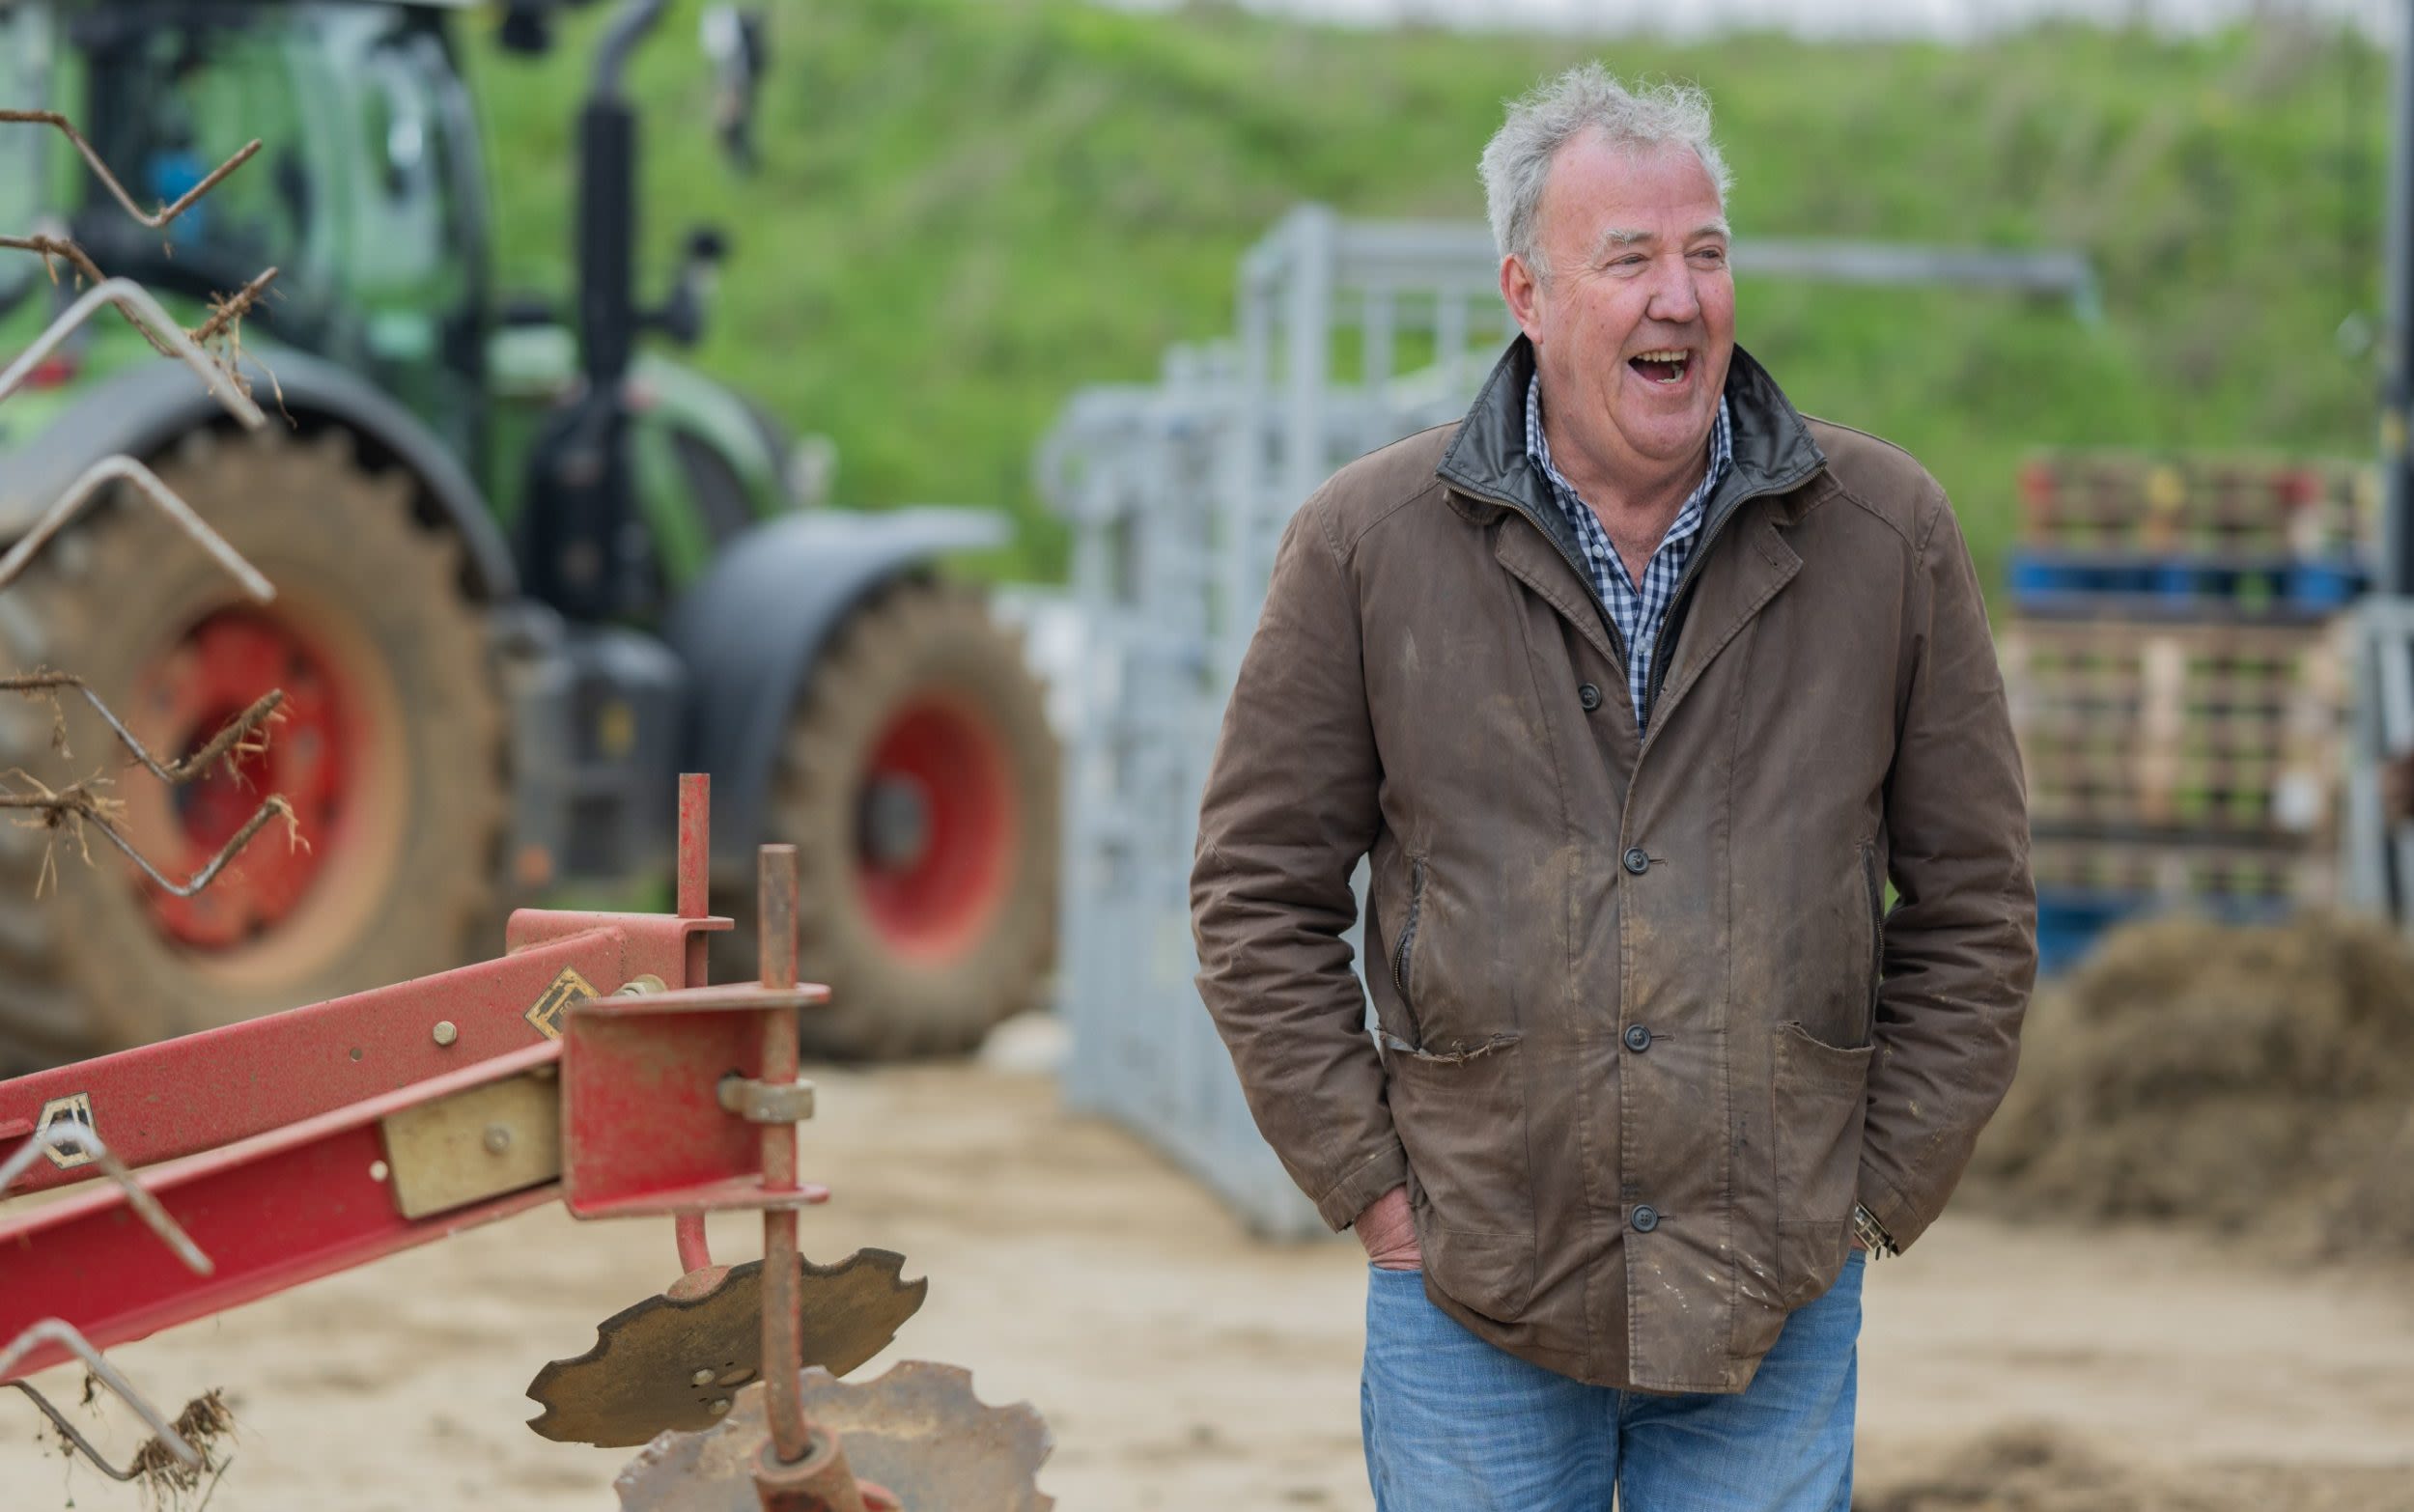 Clarkson’s Farm, series 3, part 2, review: informs, educates, entertains – the BBC must be green with envy